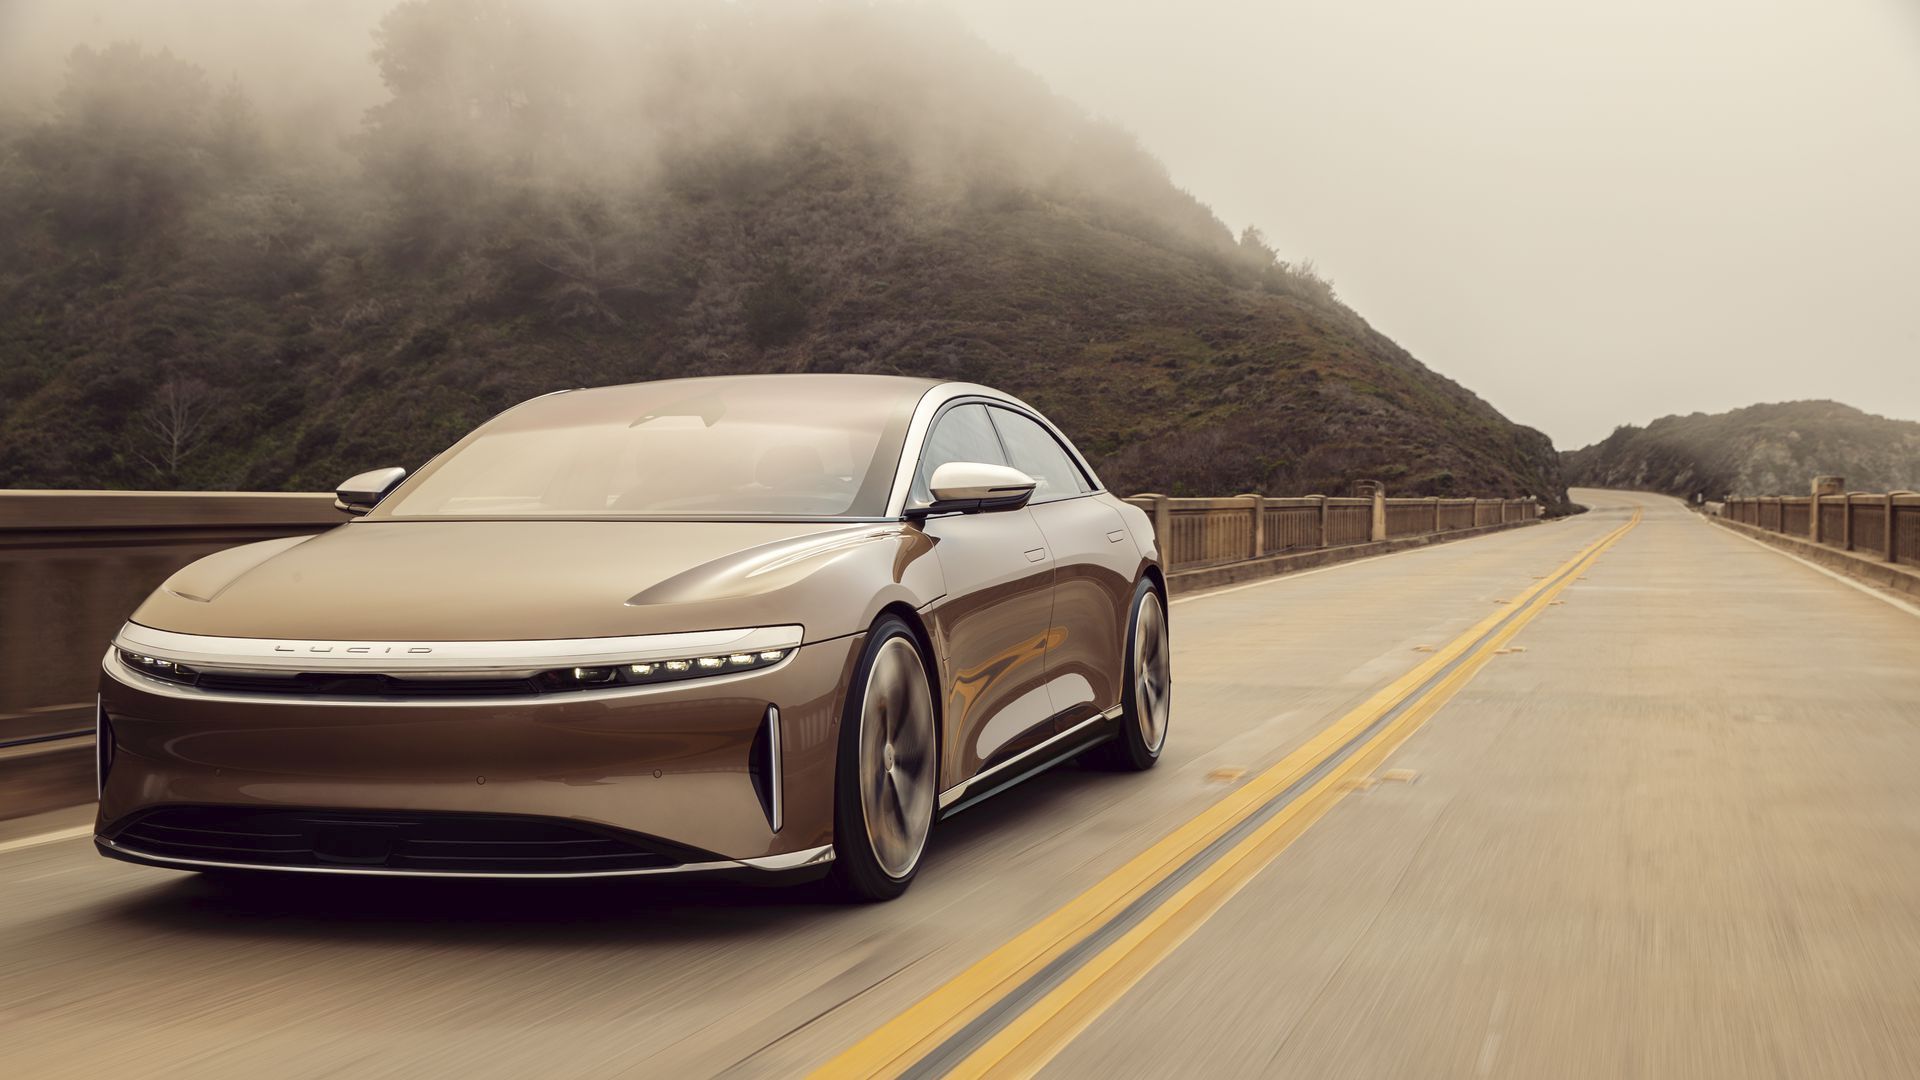 Photo of the Lucid Air electric vehicle